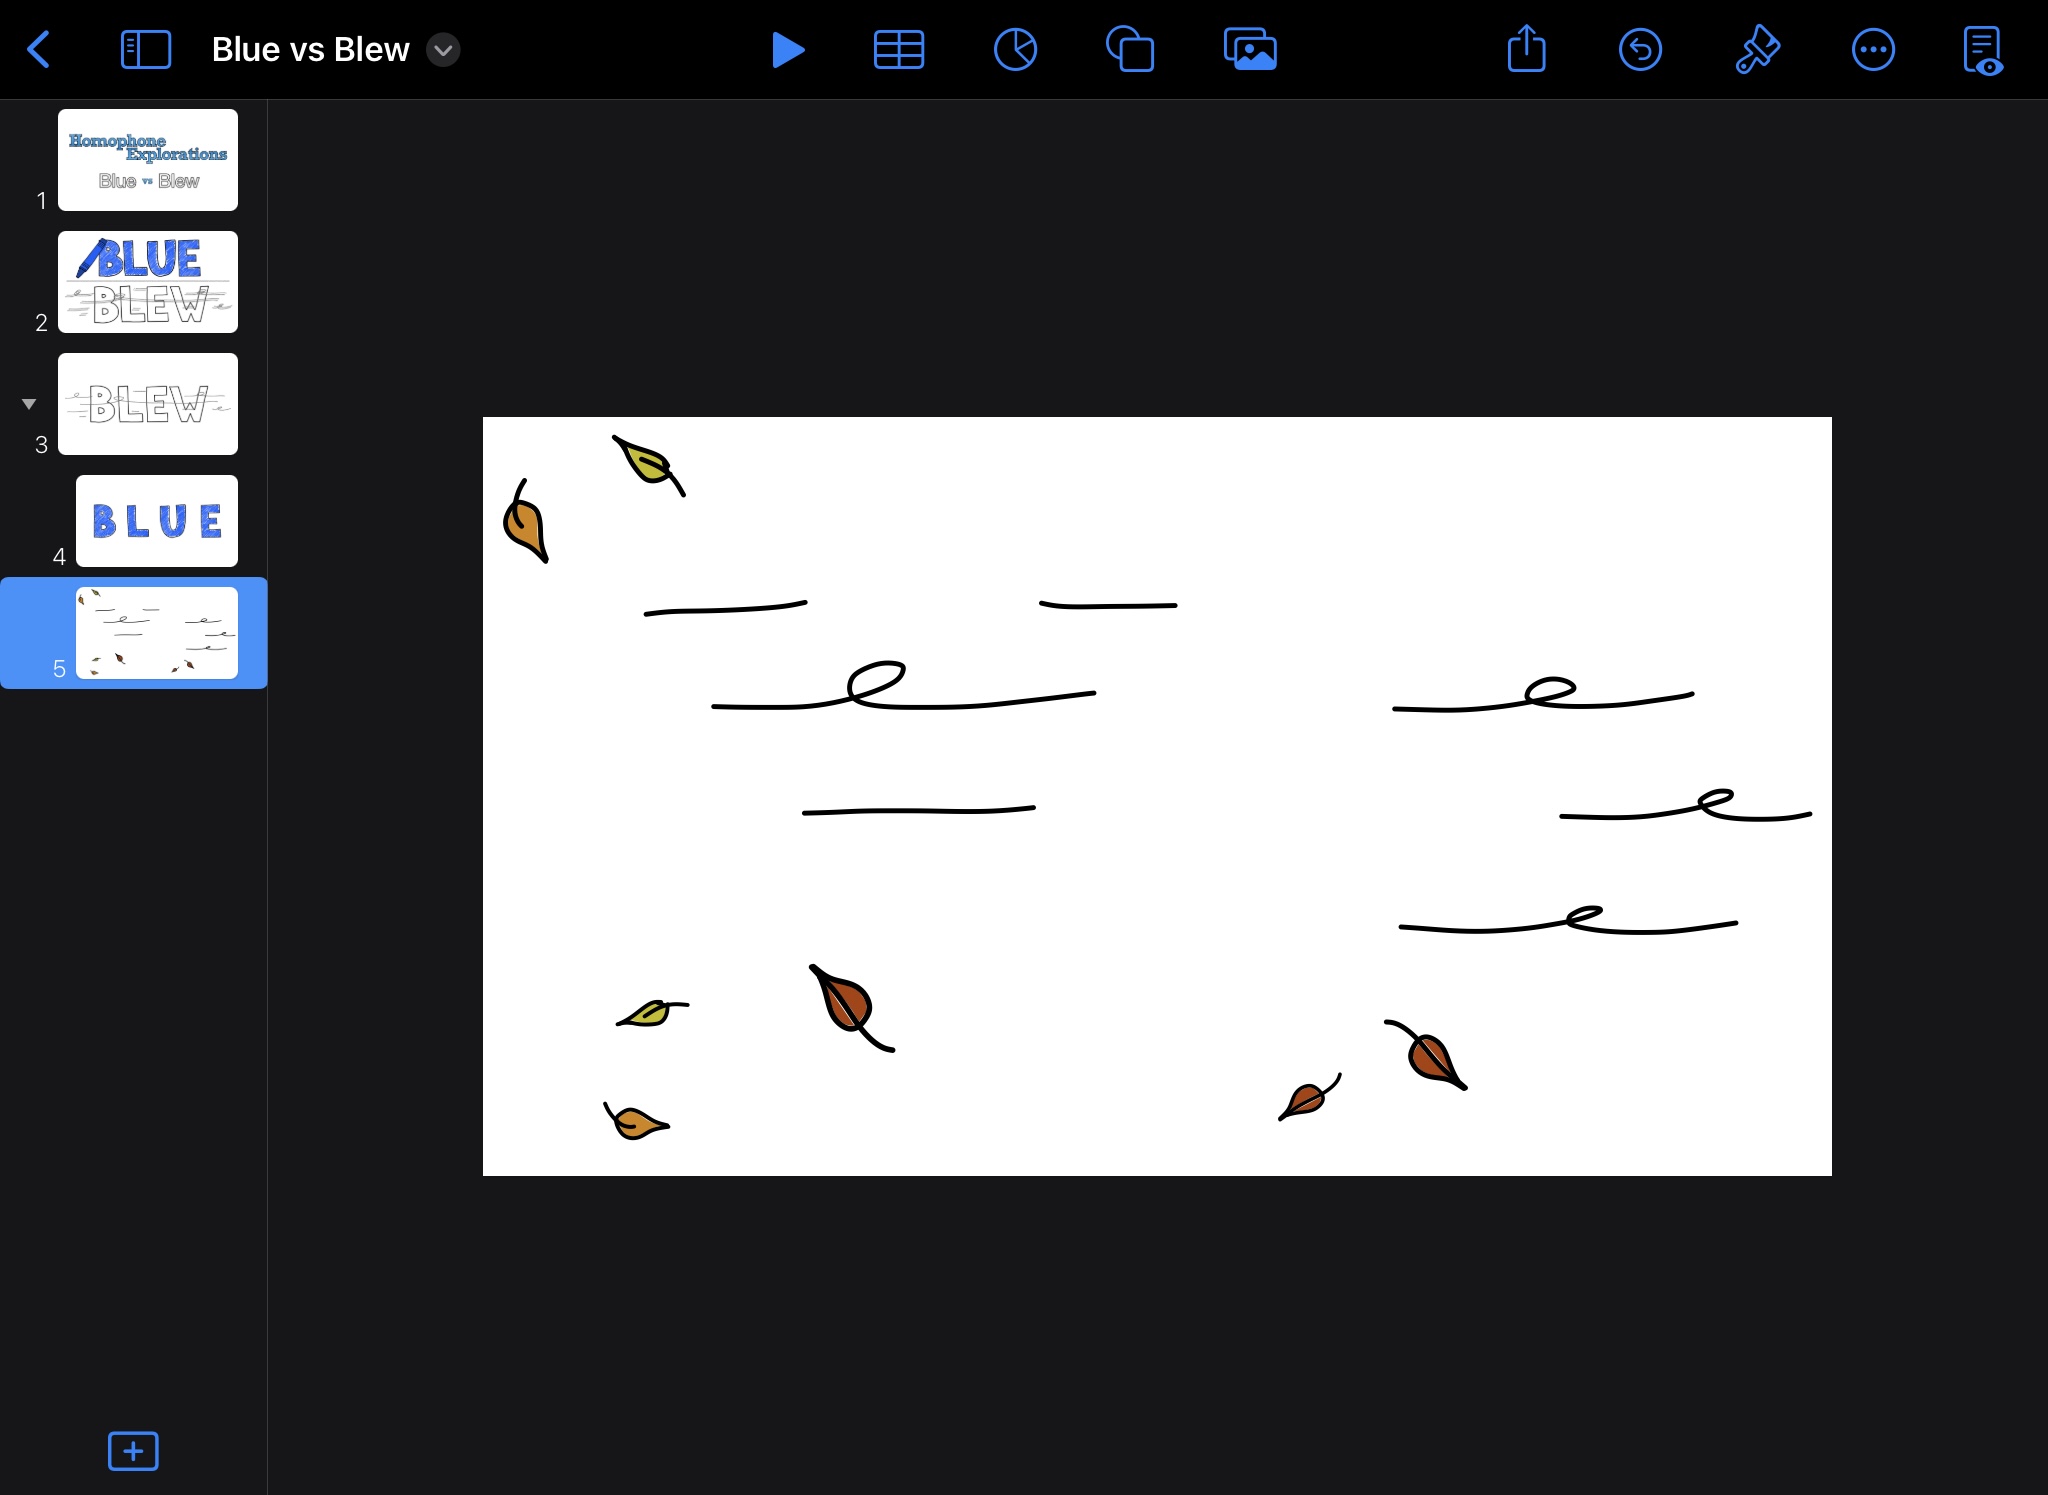 Working in the Keynote editor, drawings of leaves and wind are on a slide to illustrate the word "blew"